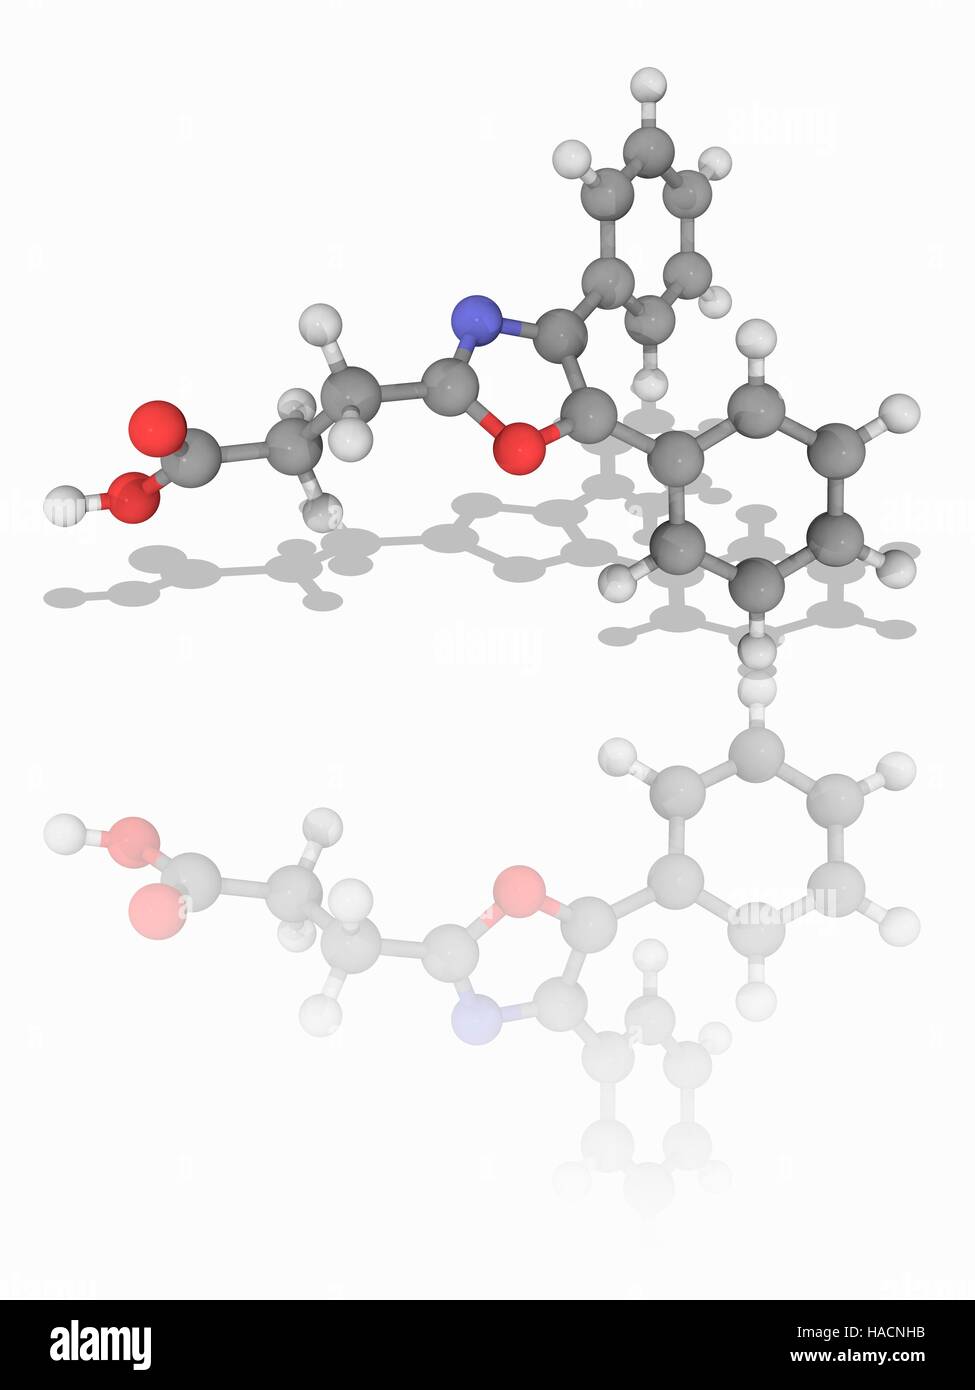 Oxaprozin. Molecular model of the non-steroidal anti-inflammatory drug oxaprozin (C18.H15.N.O3), used to relieve inflammation, swelling, stiffness and joint pain in patients with arthritis. Atoms are represented as spheres and are colour-coded: carbon (grey), hydrogen (white), nitrogen (blue) and oxygen (red). Illustration. Stock Photo